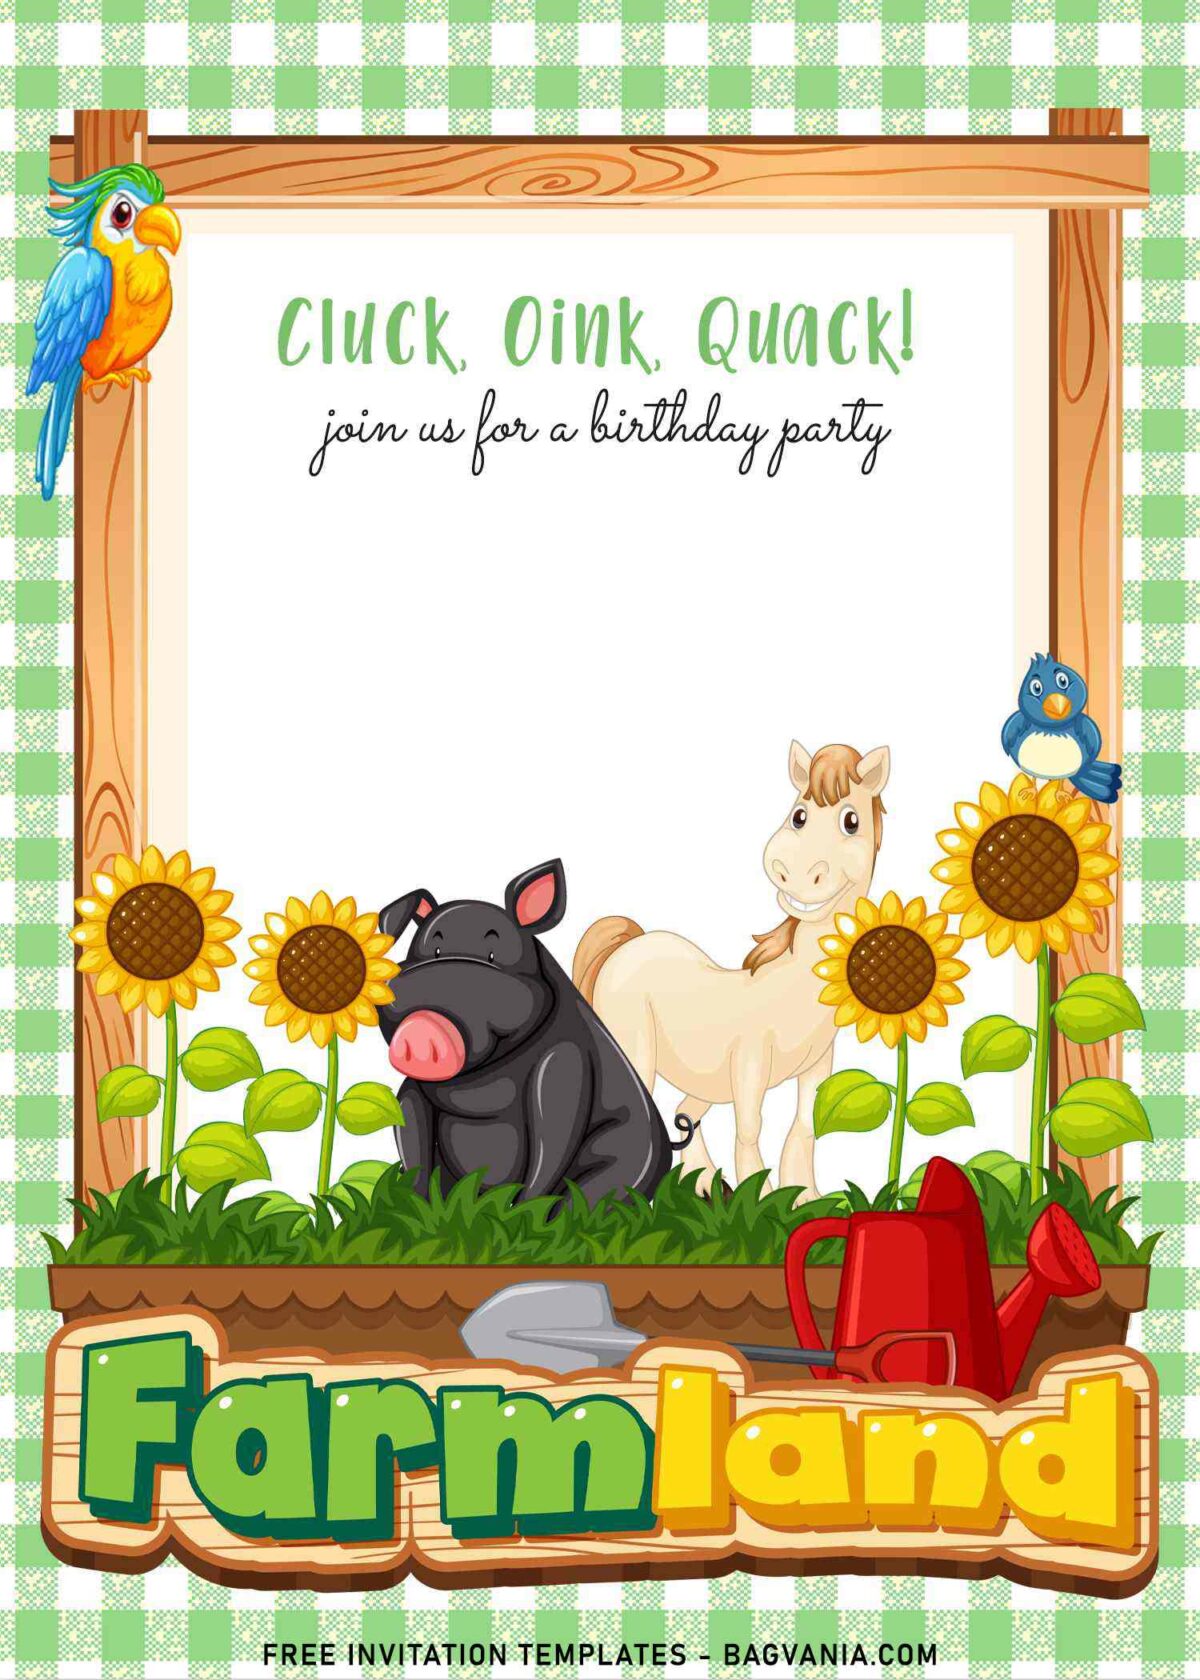 7+ Farm Animals And Garden Flowers Birthday Invitation Templates with adorable horse